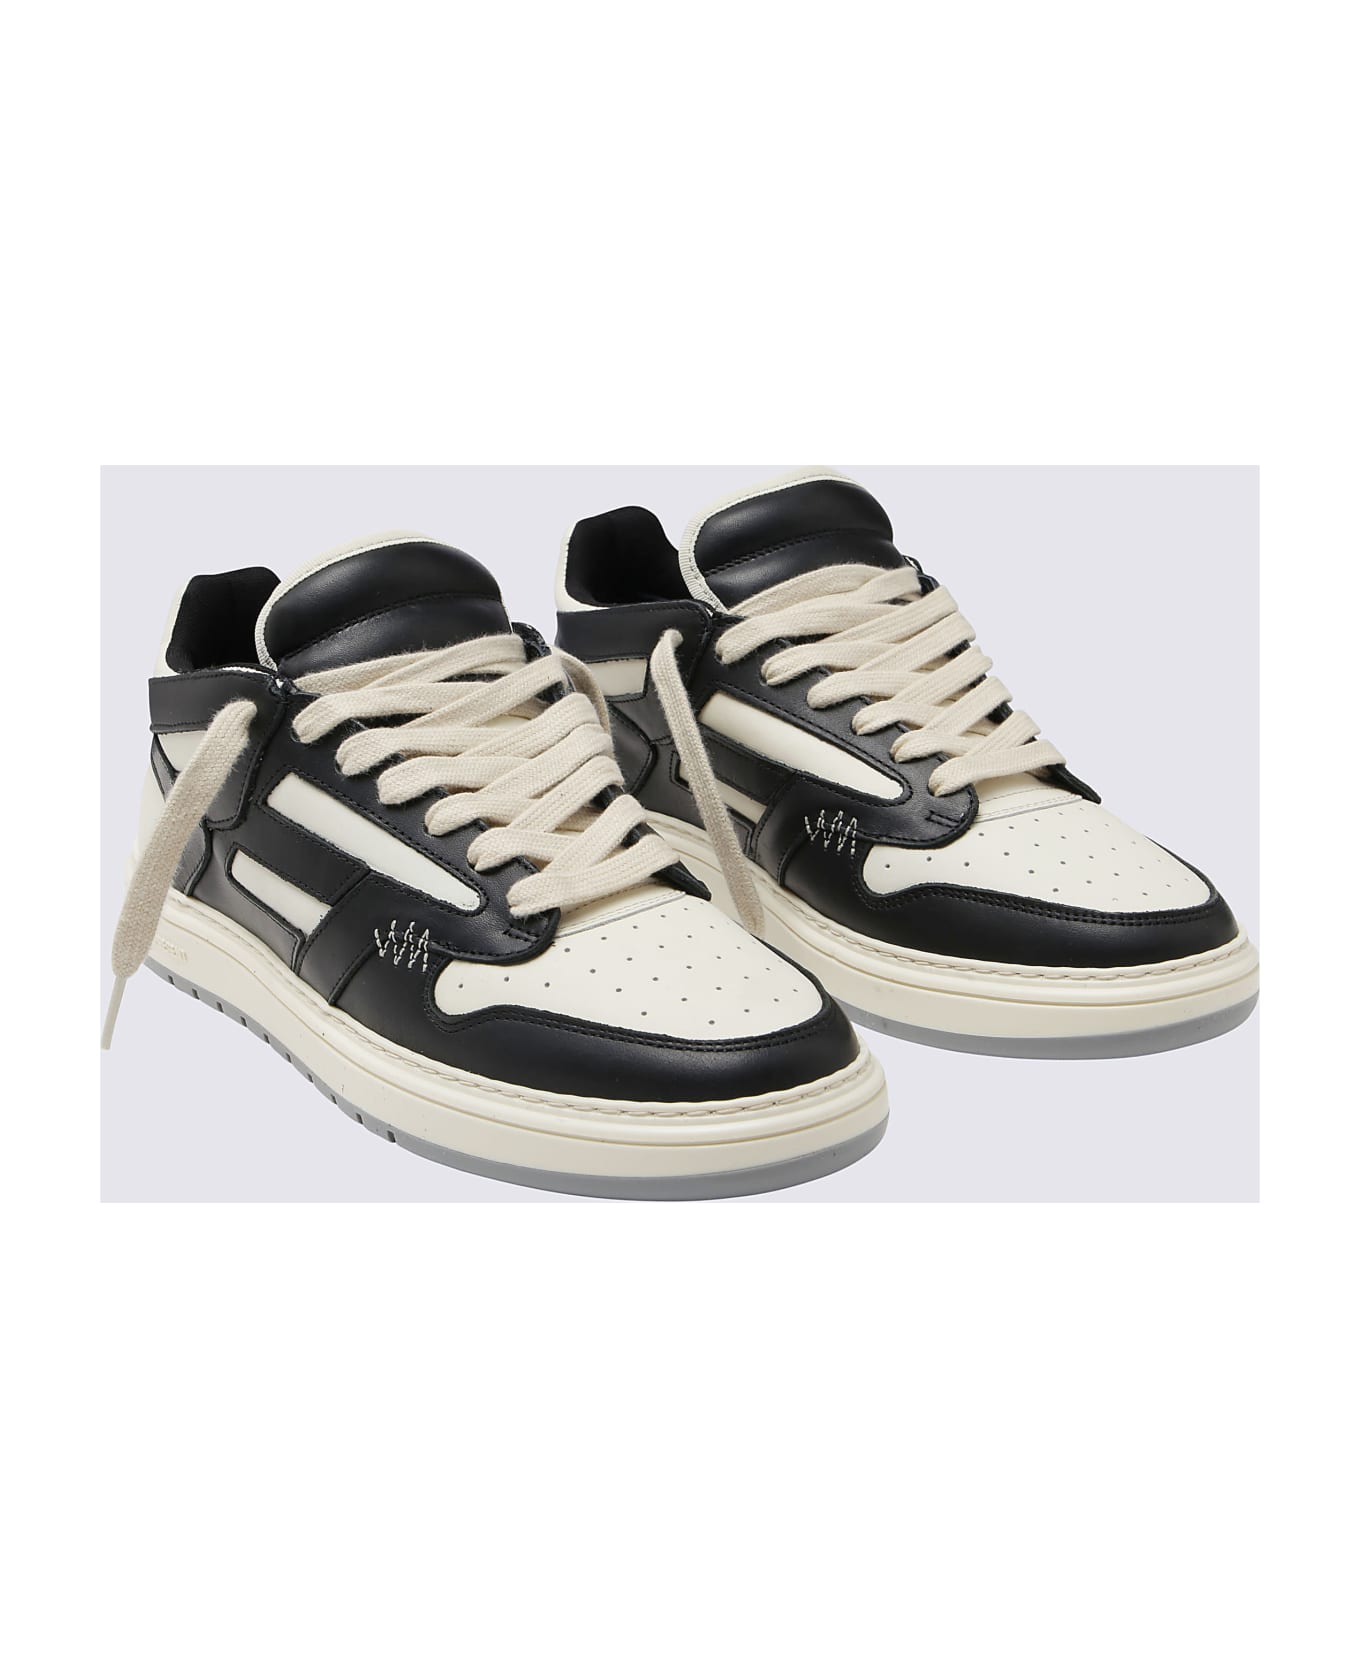 REPRESENT White And Black Leather Reptor Low Panelled Sneakers - White